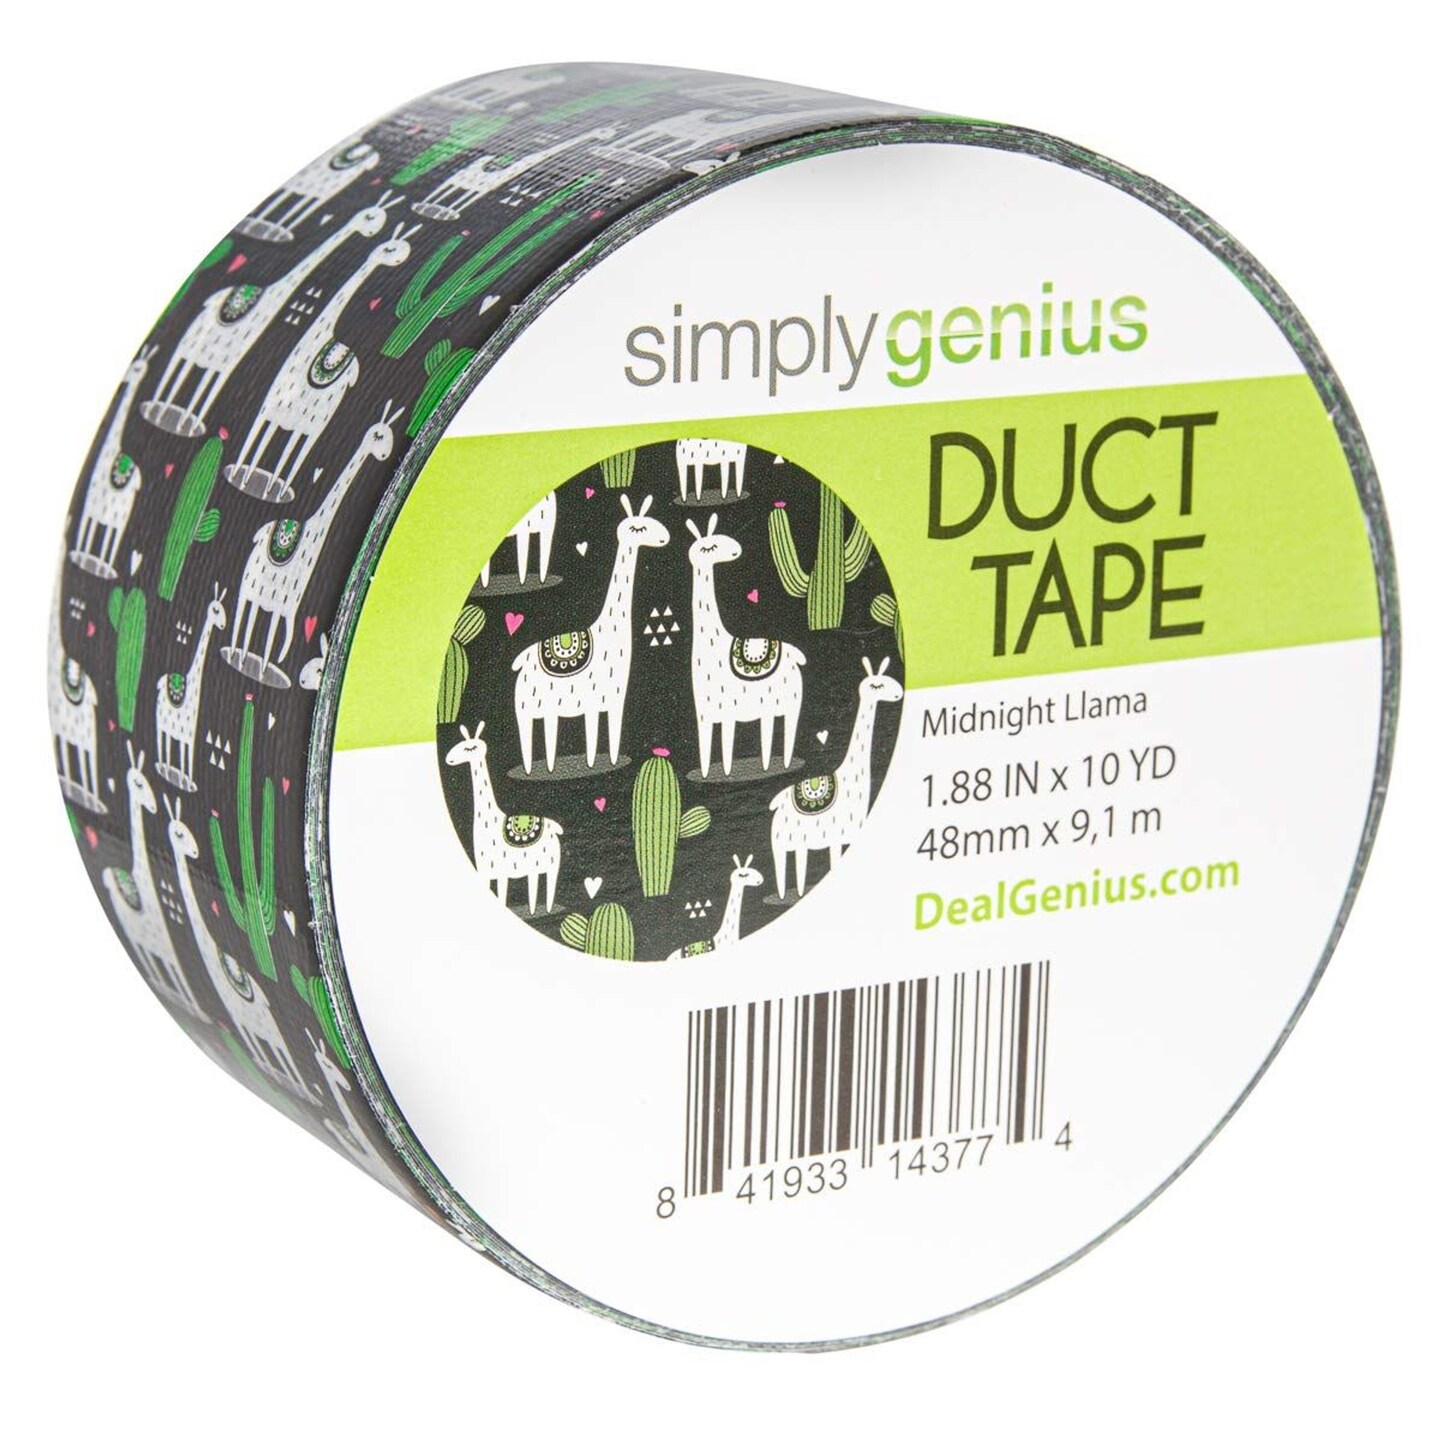 Simply Genius Pattern Duct Tape Heavy Duty - Craft Supplies for Kids &#x26; Adults - Colored Duct Tape - Single Roll 1.8 in x 10 yards - Colorful Tape for DIY, Craft &#x26; Home Improvement (Midnight Llama)